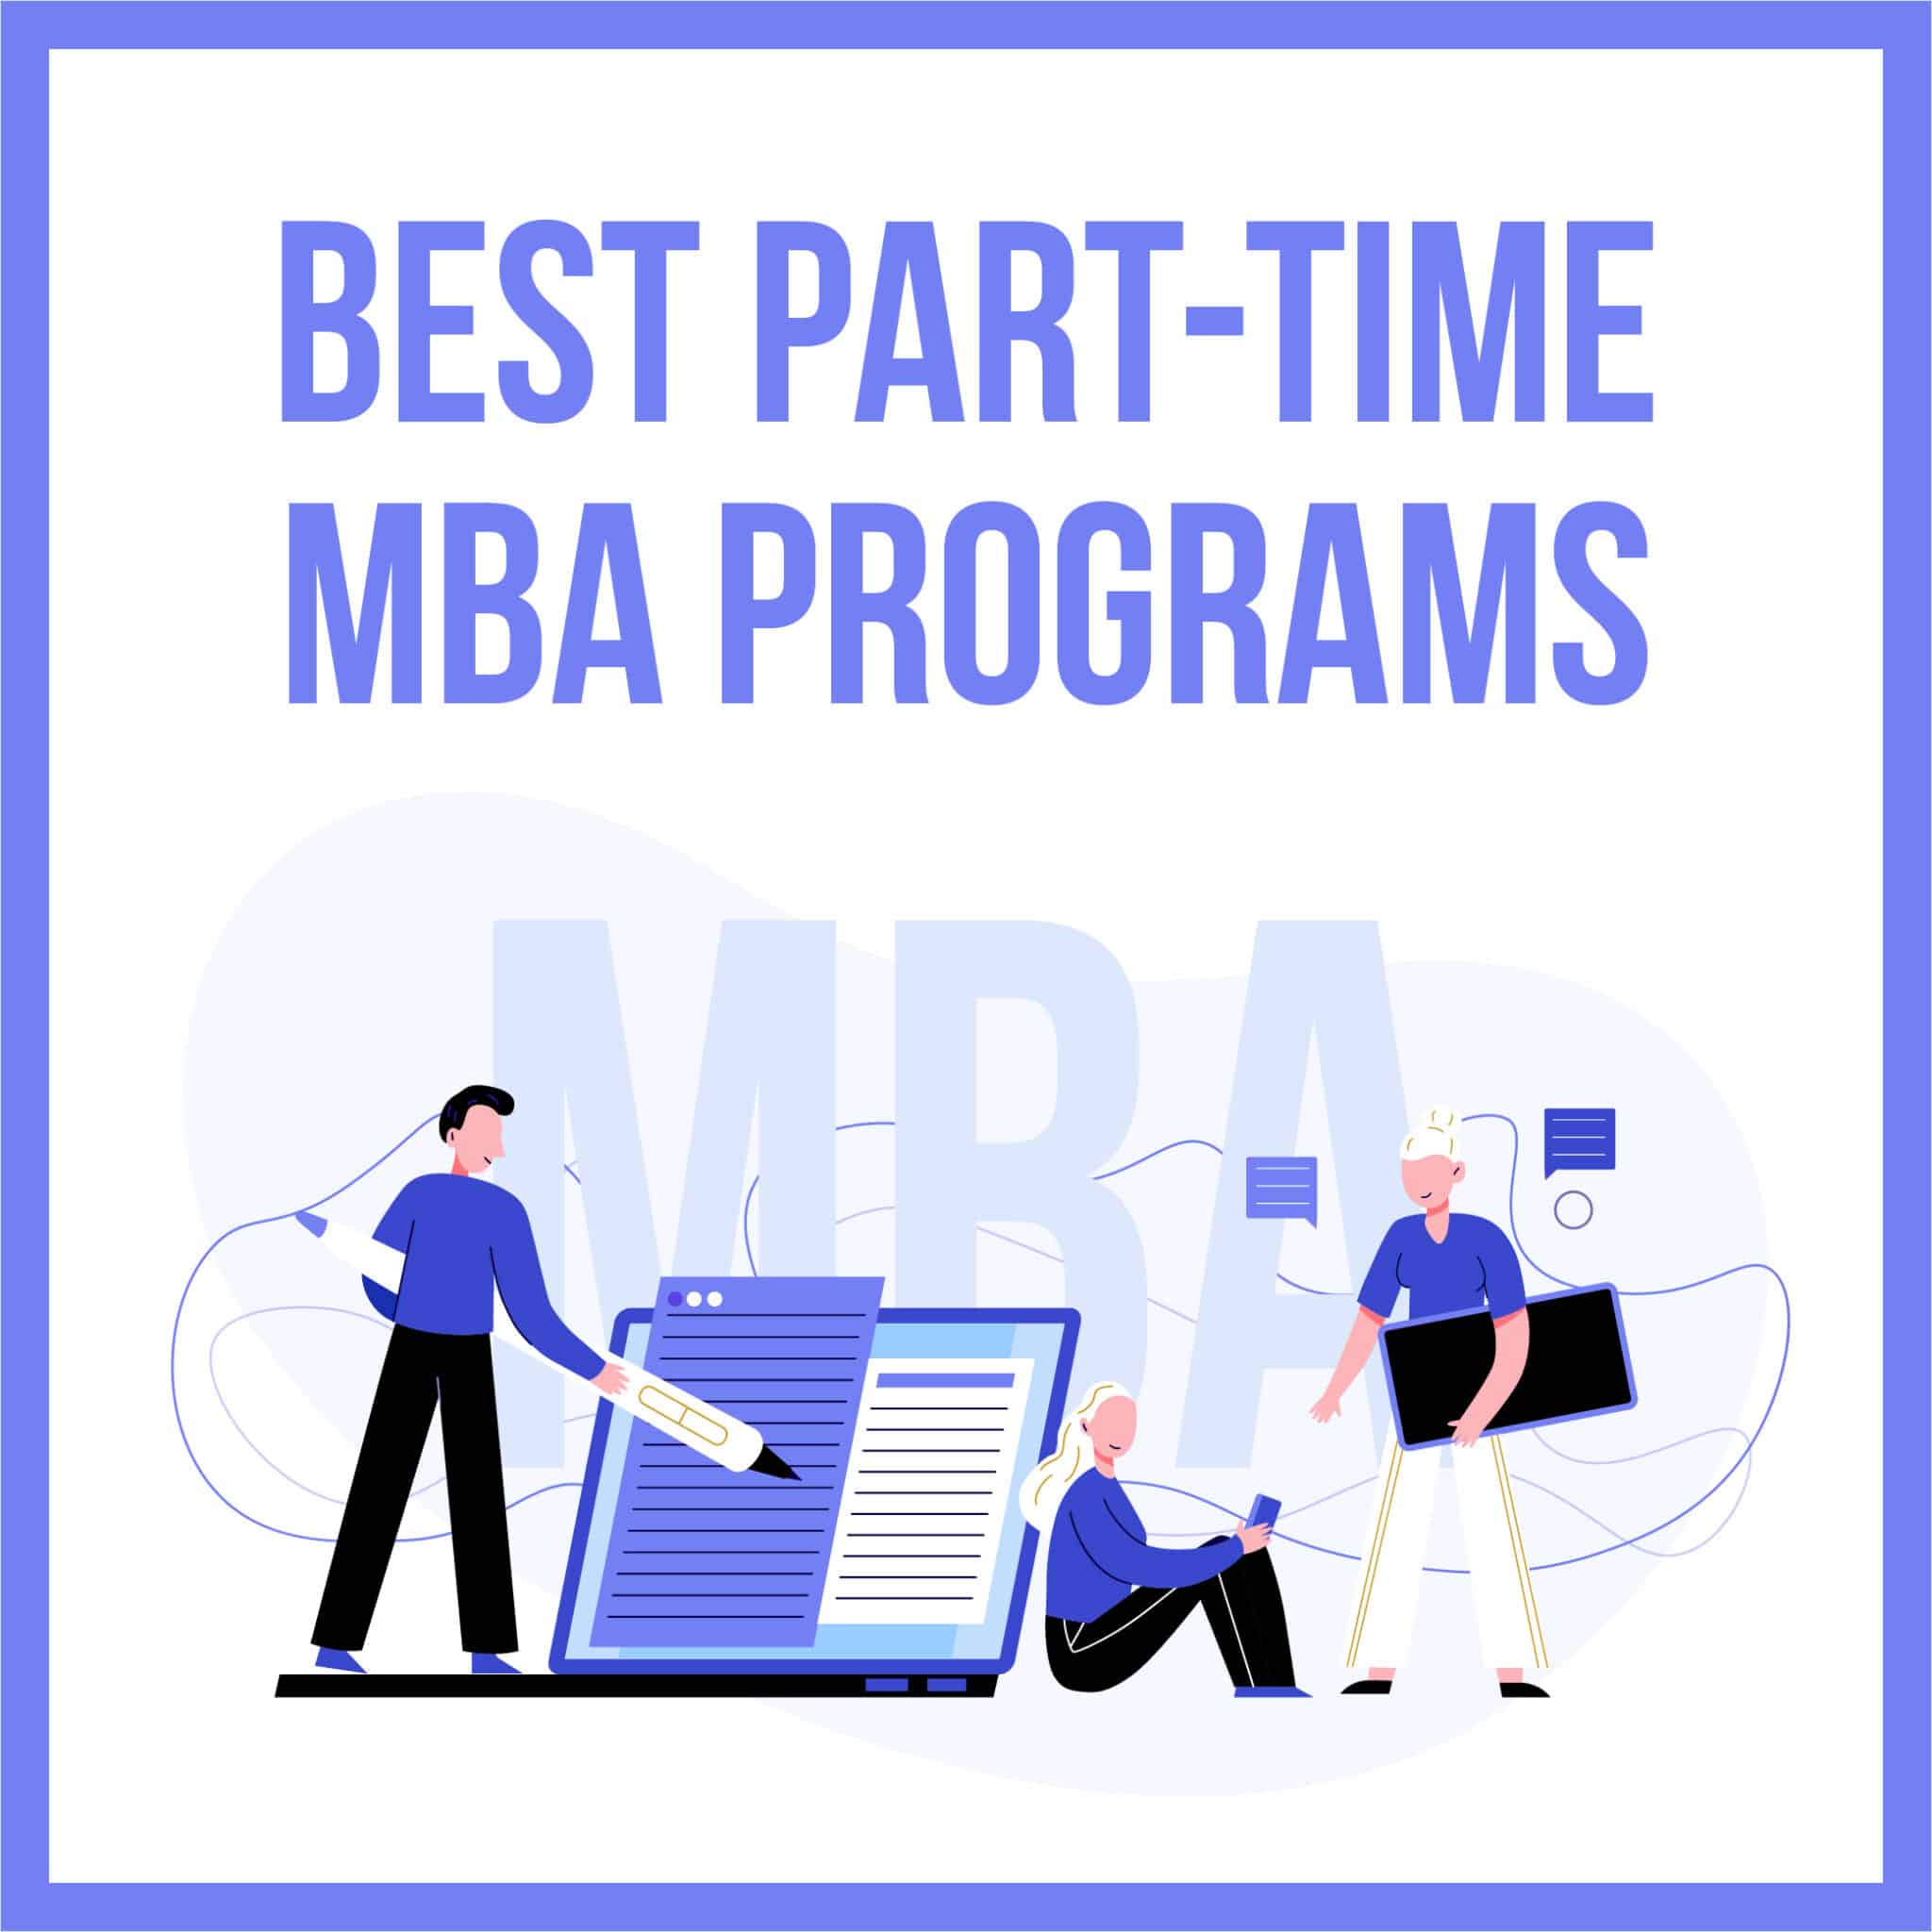 Top 50 Best PartTime MBA Programs Rankings & Reviews CRUSH Your